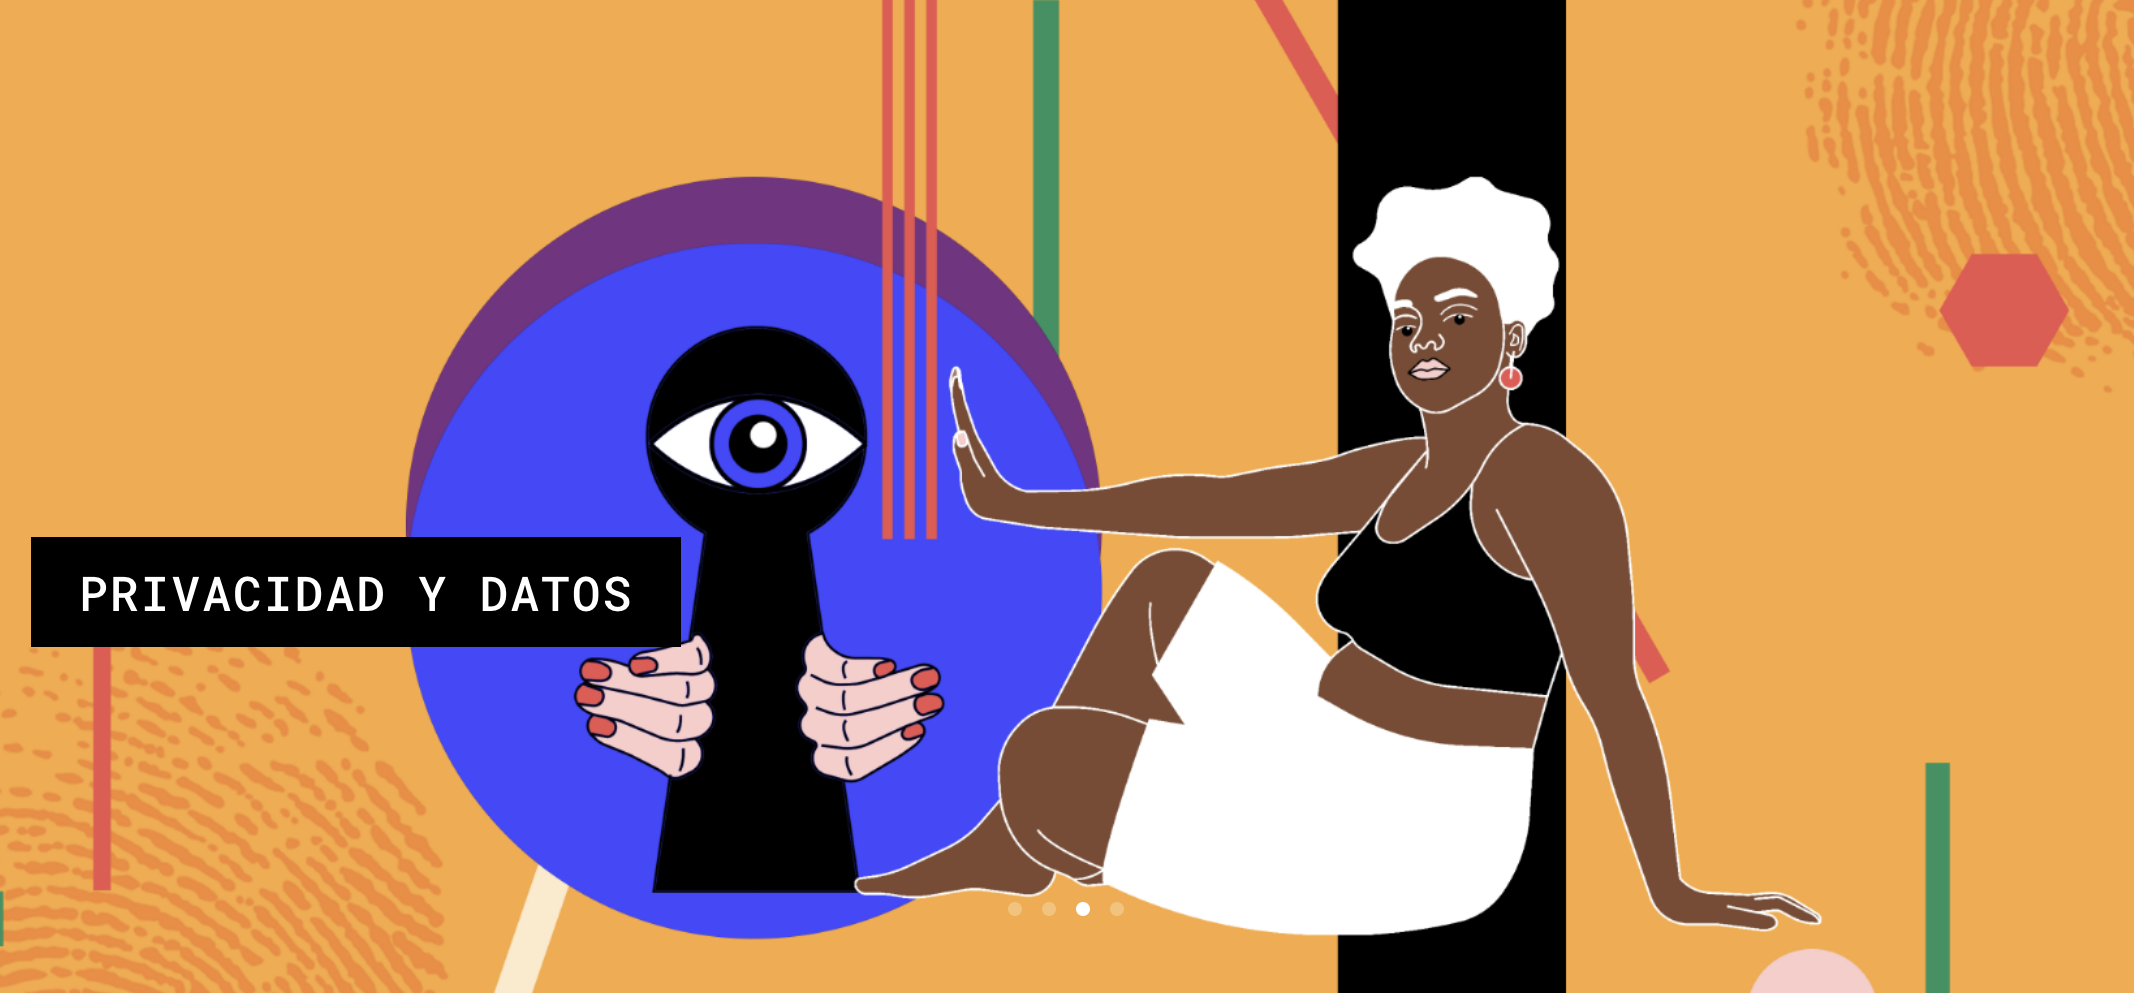 Graphic illustration of woman with brown skin sitting, leaning her hand against a large blue circle with a blue eye and red finger nail painted hands peaking out of a keyhole. Behind is abstract orange wallpaper with fingerprints and geometric shapes.